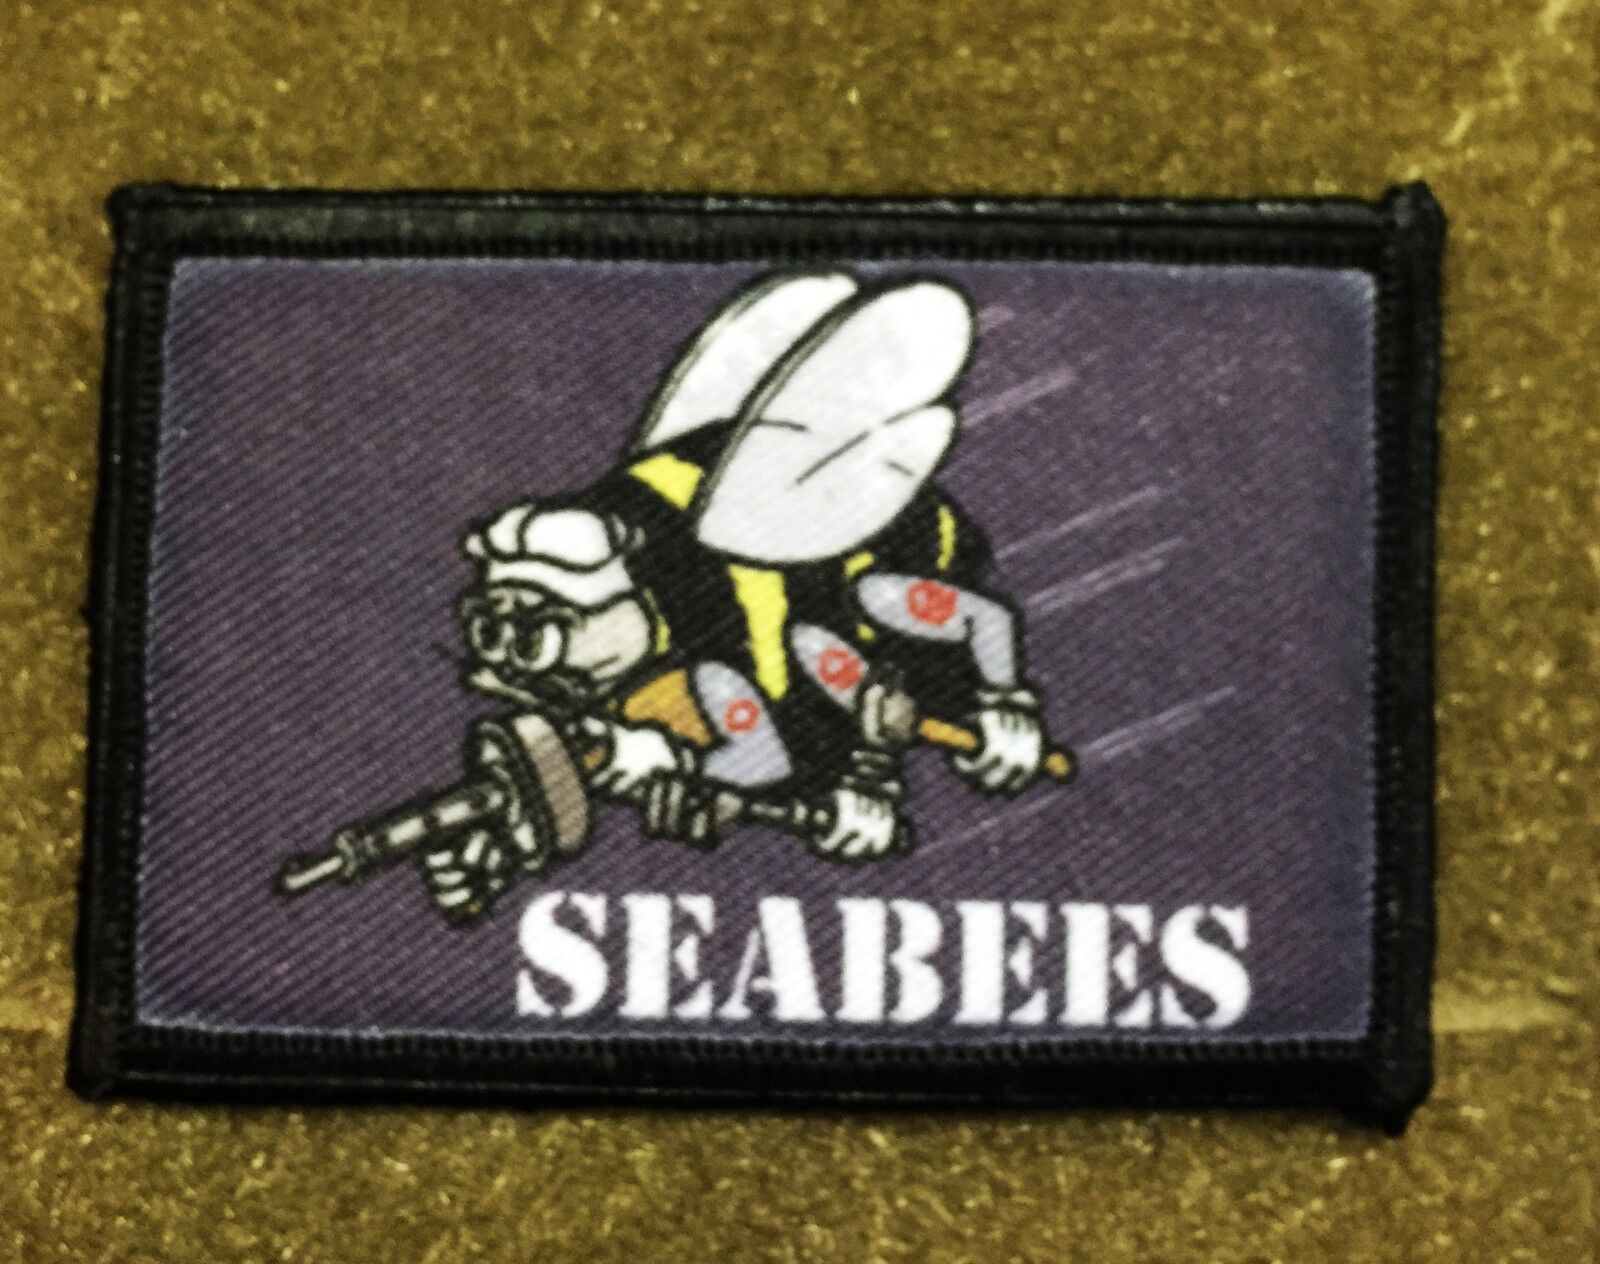 Navy Seabees Morale Patch Tactical Military USA Hook Badge Army Flag Navy WWII